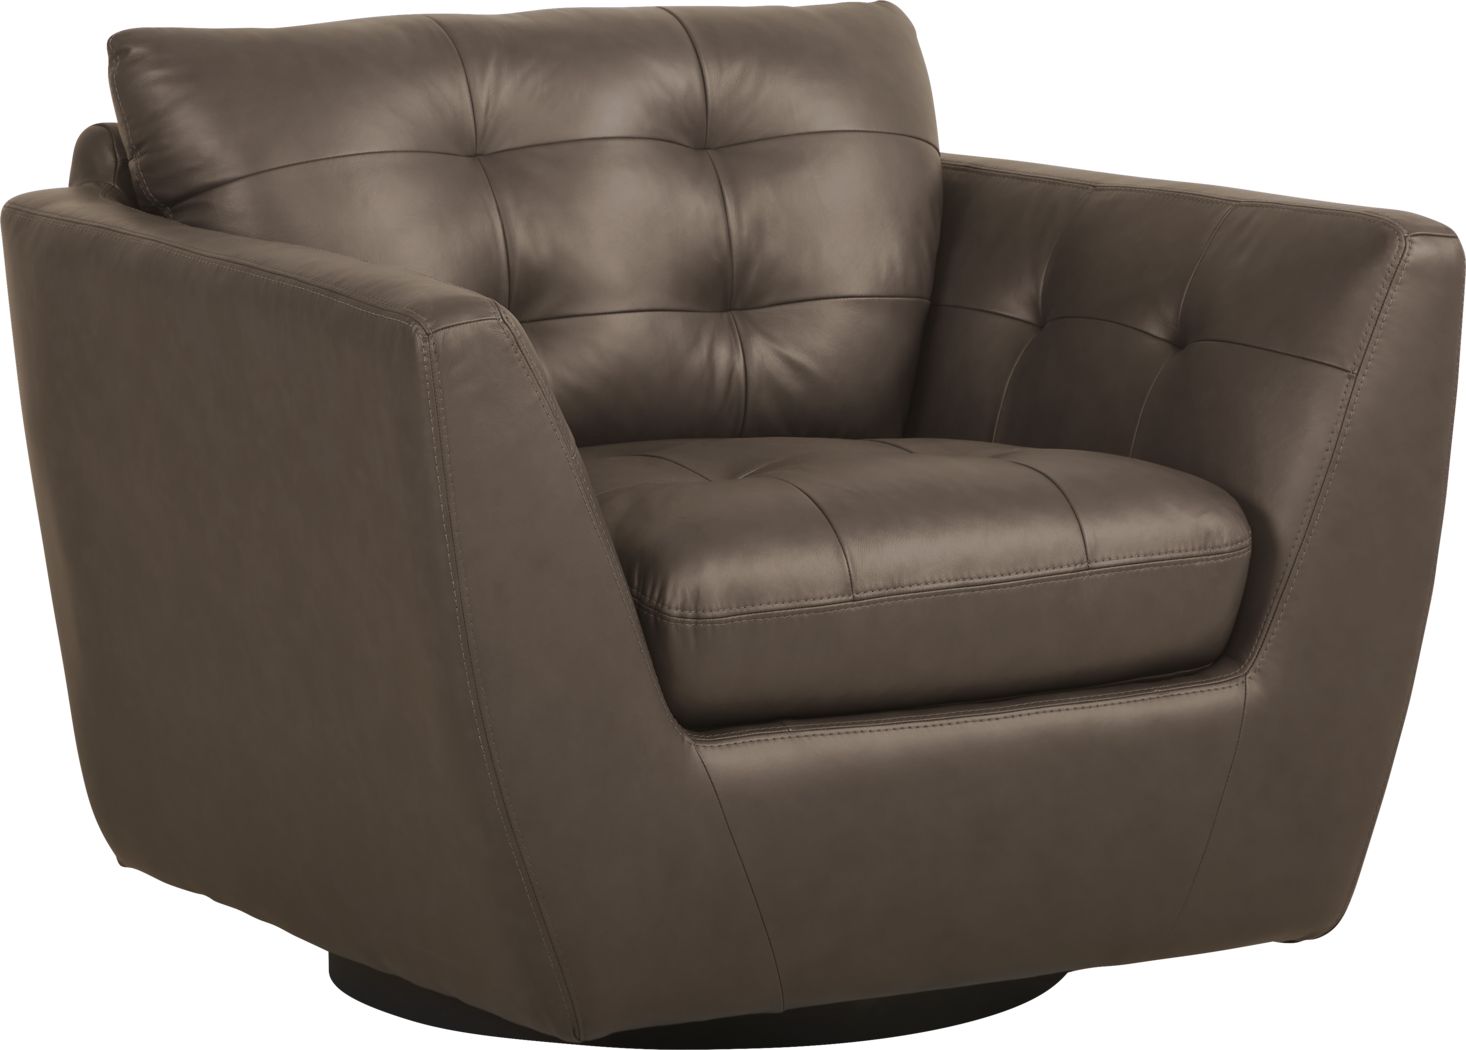 Aragon Brown Leather Swivel Chair - Rooms To Go